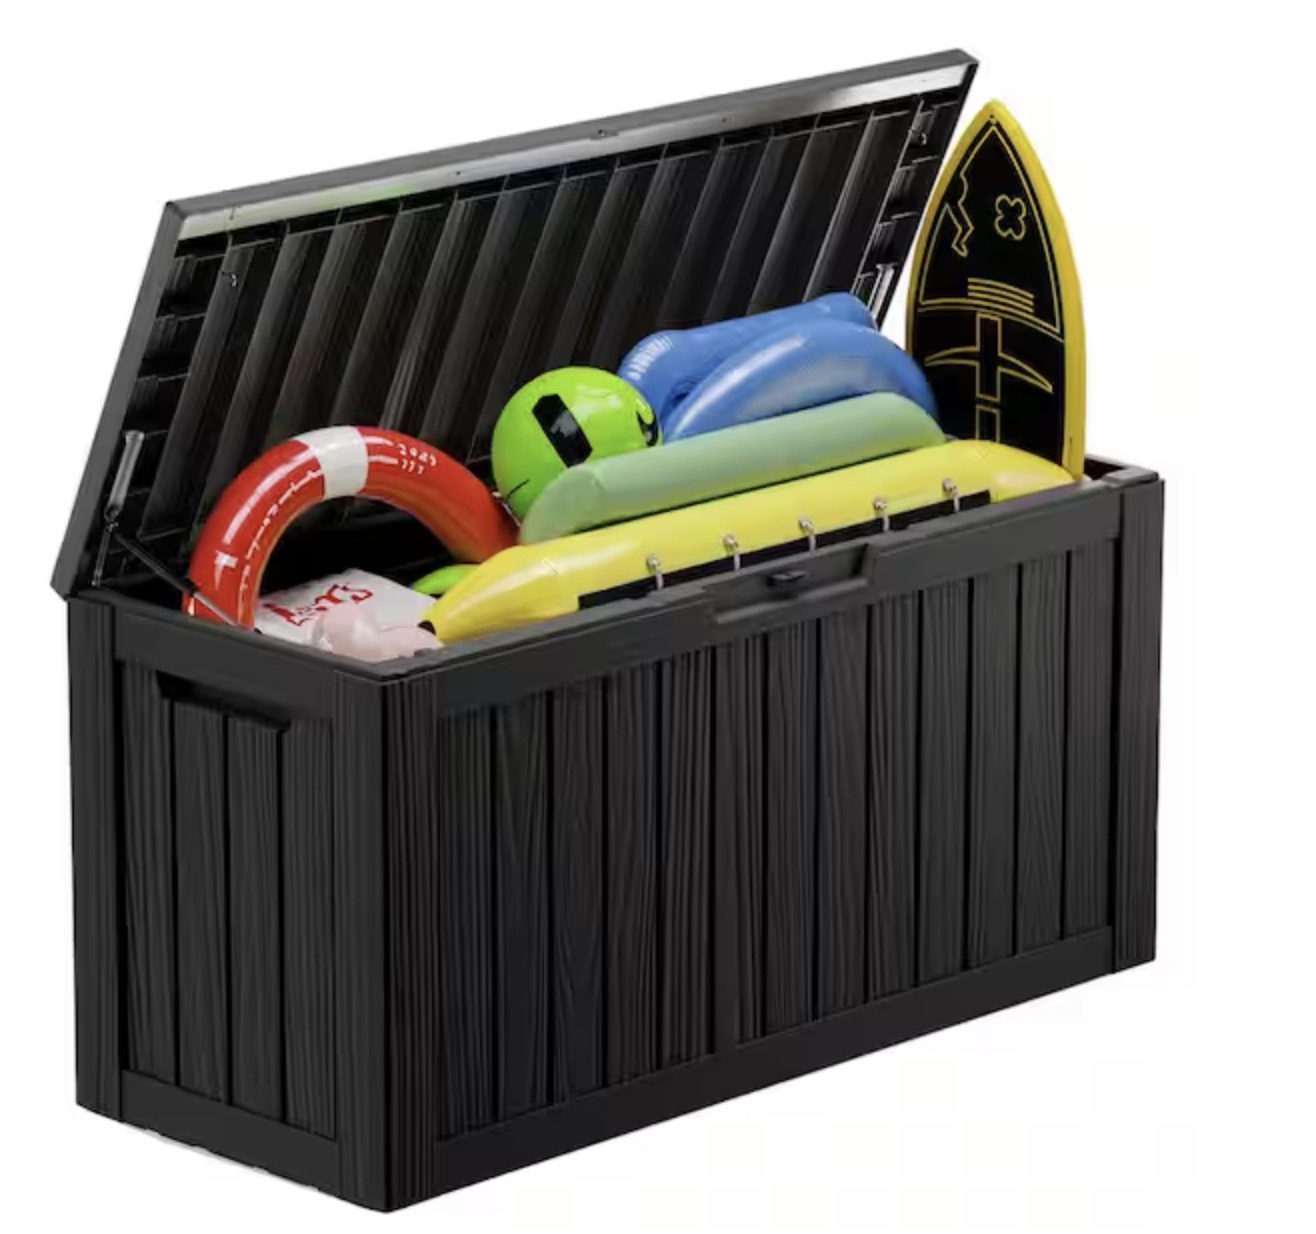 Out of doors Storage Deck Field (80 gallon) solely $49.99 shipped!